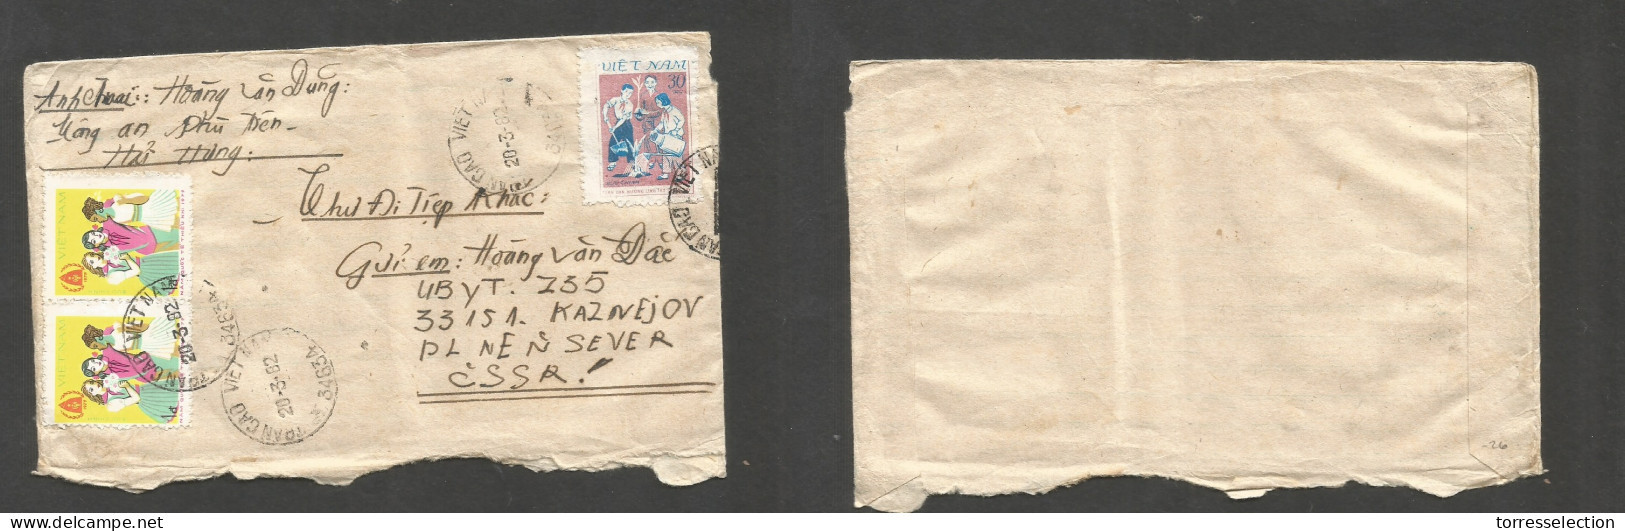 INDOCHINA. 1982 (20 March) North Vietnam. Trancao - Czech Republic. Color Multifkd Envelope At 2,30d Rate. VF, Tied Cds. - Otros - Asia